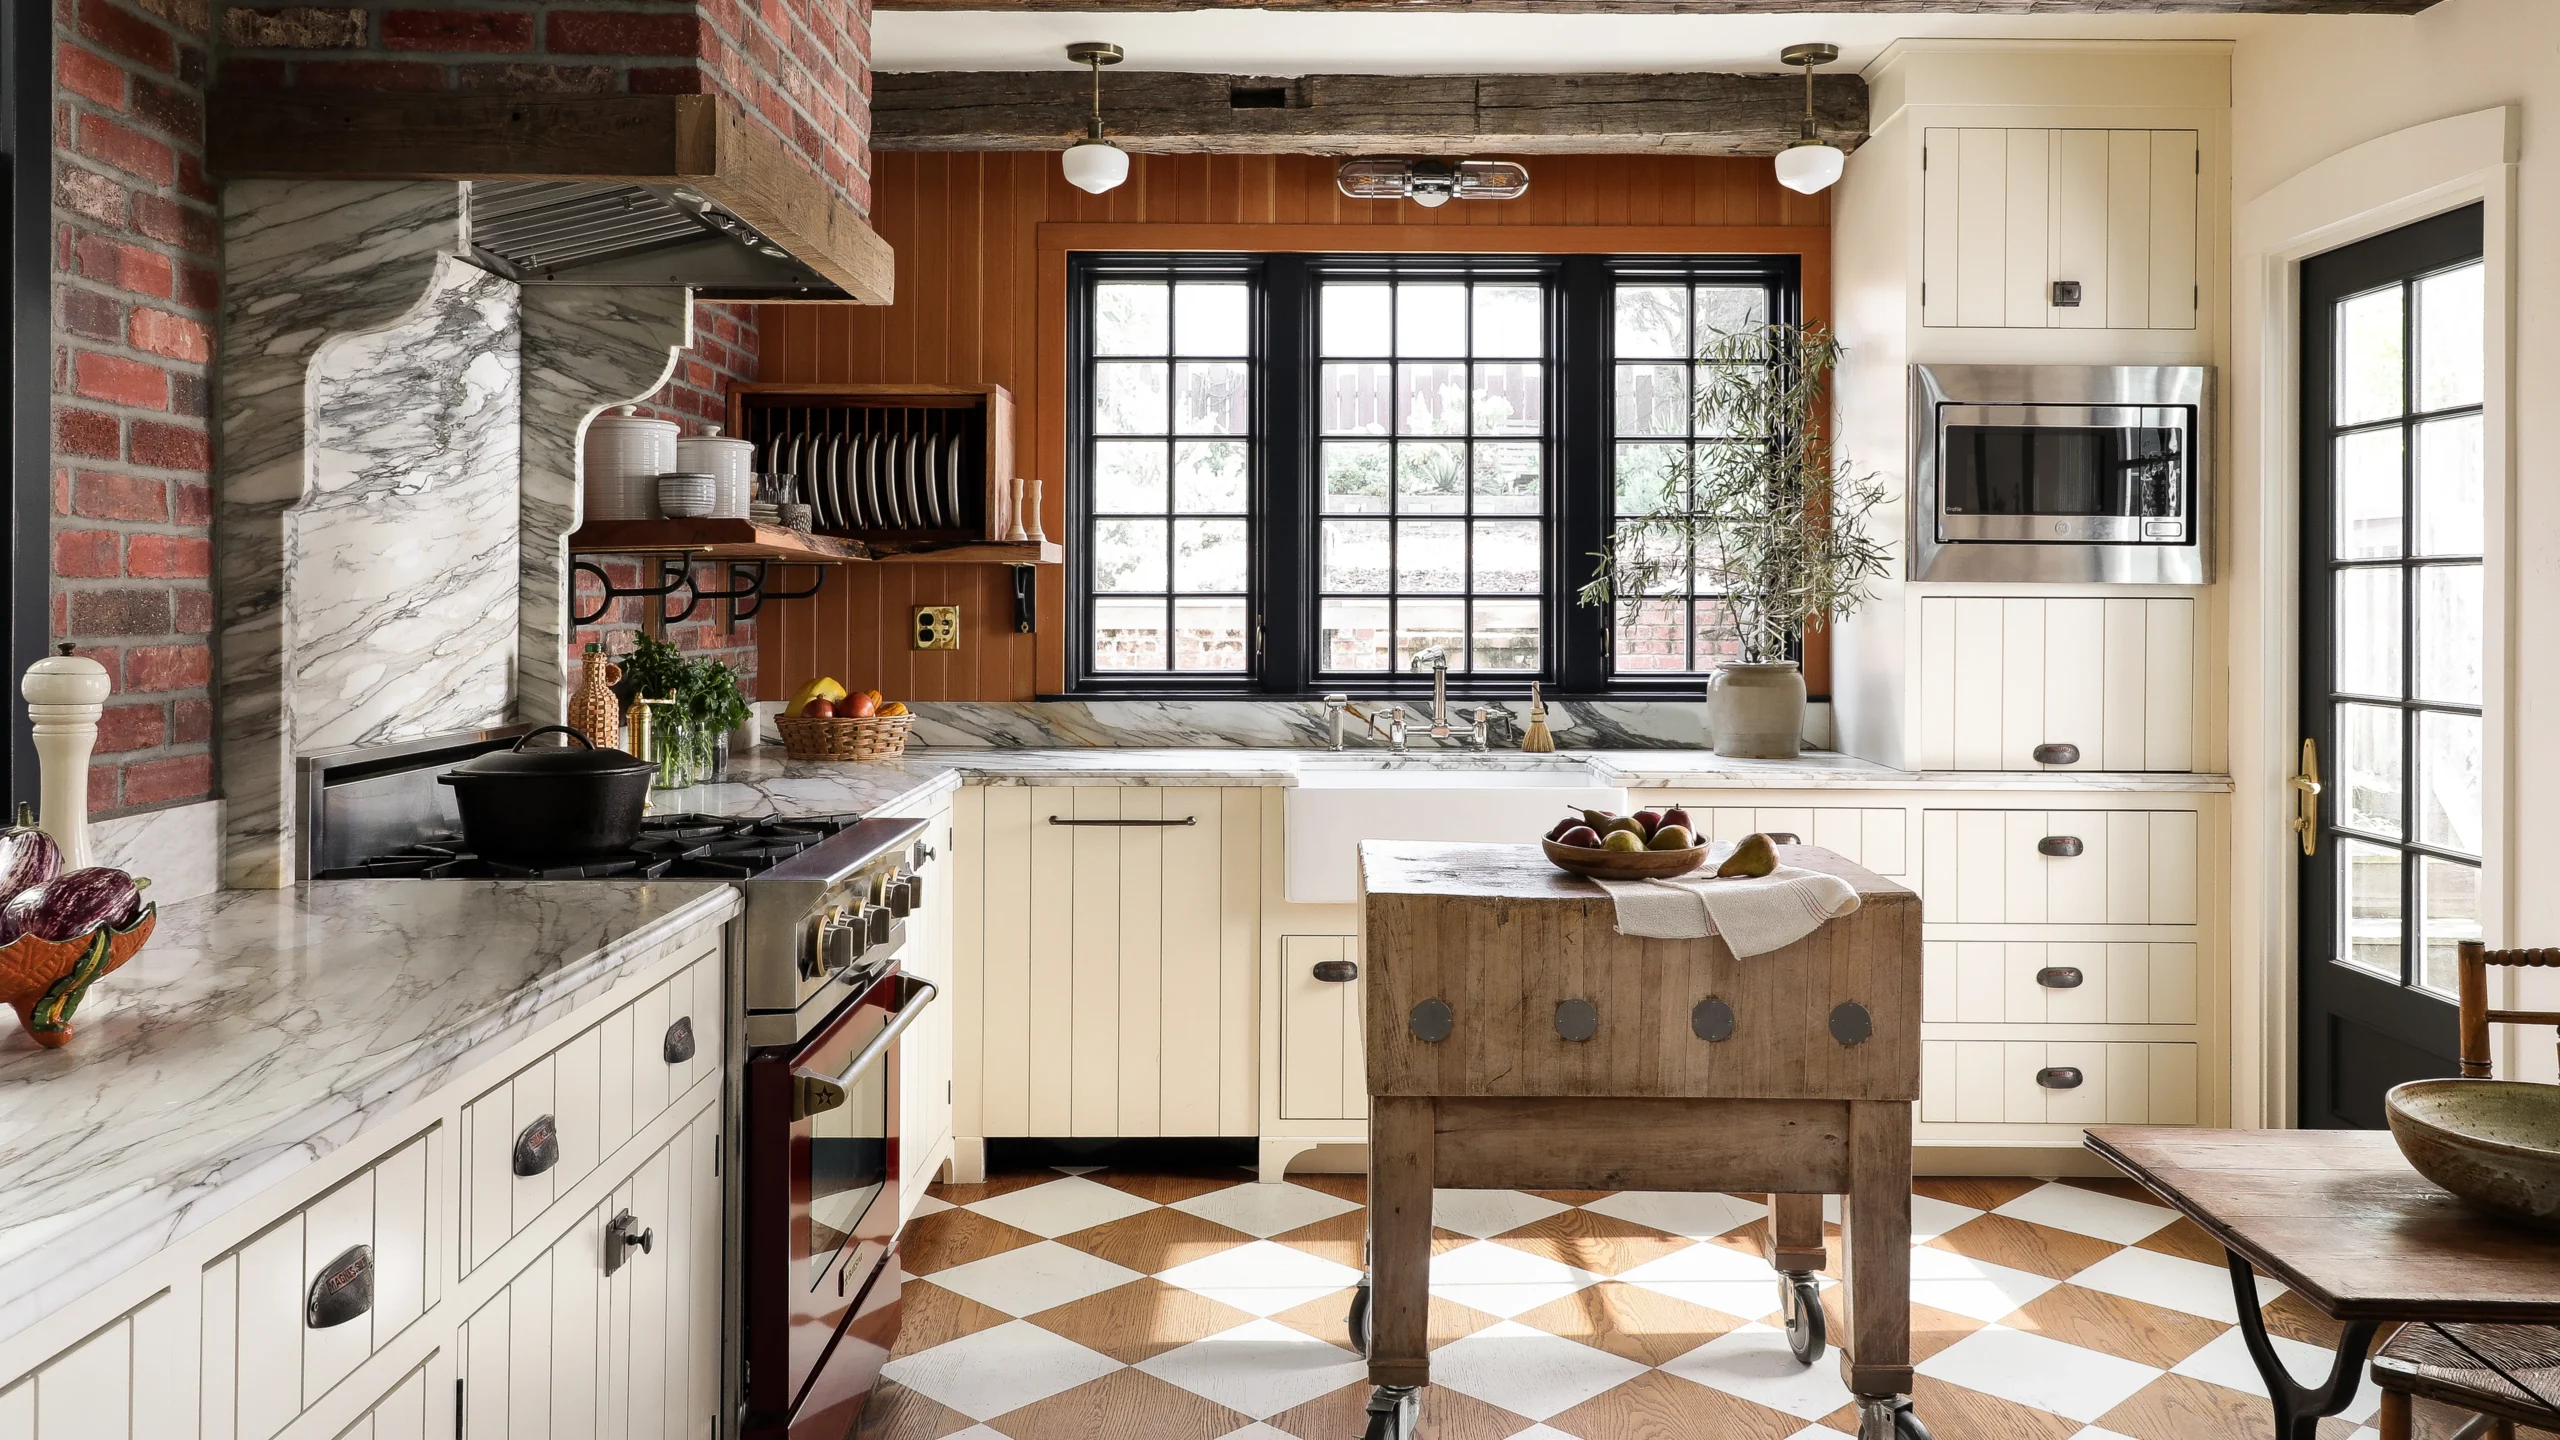 Breathing Life into Old Spaces: Country-Style Home Renovation Ideas